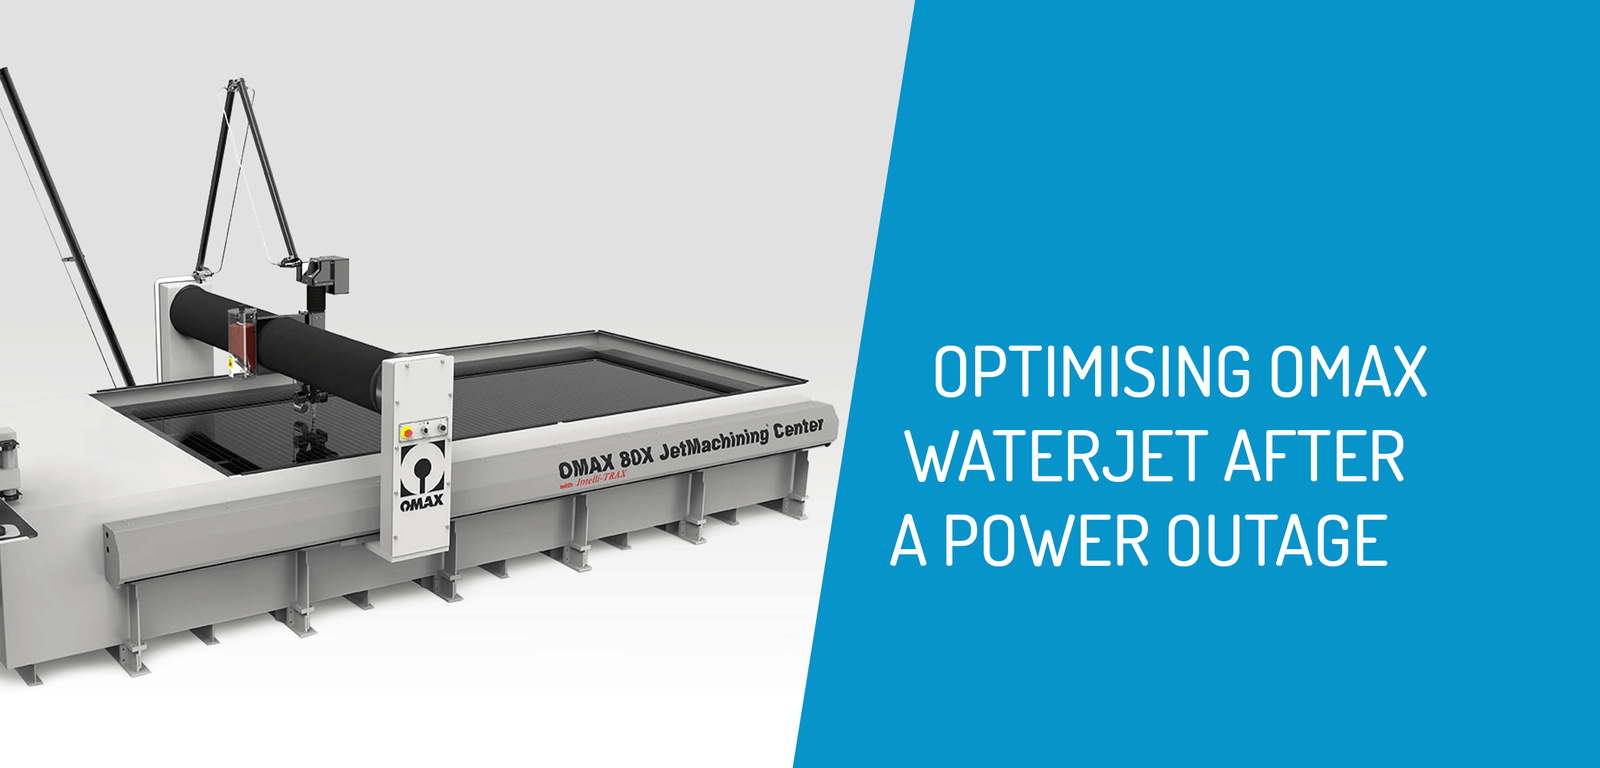 OMAX Waterjet Optimisation After a Power Outage